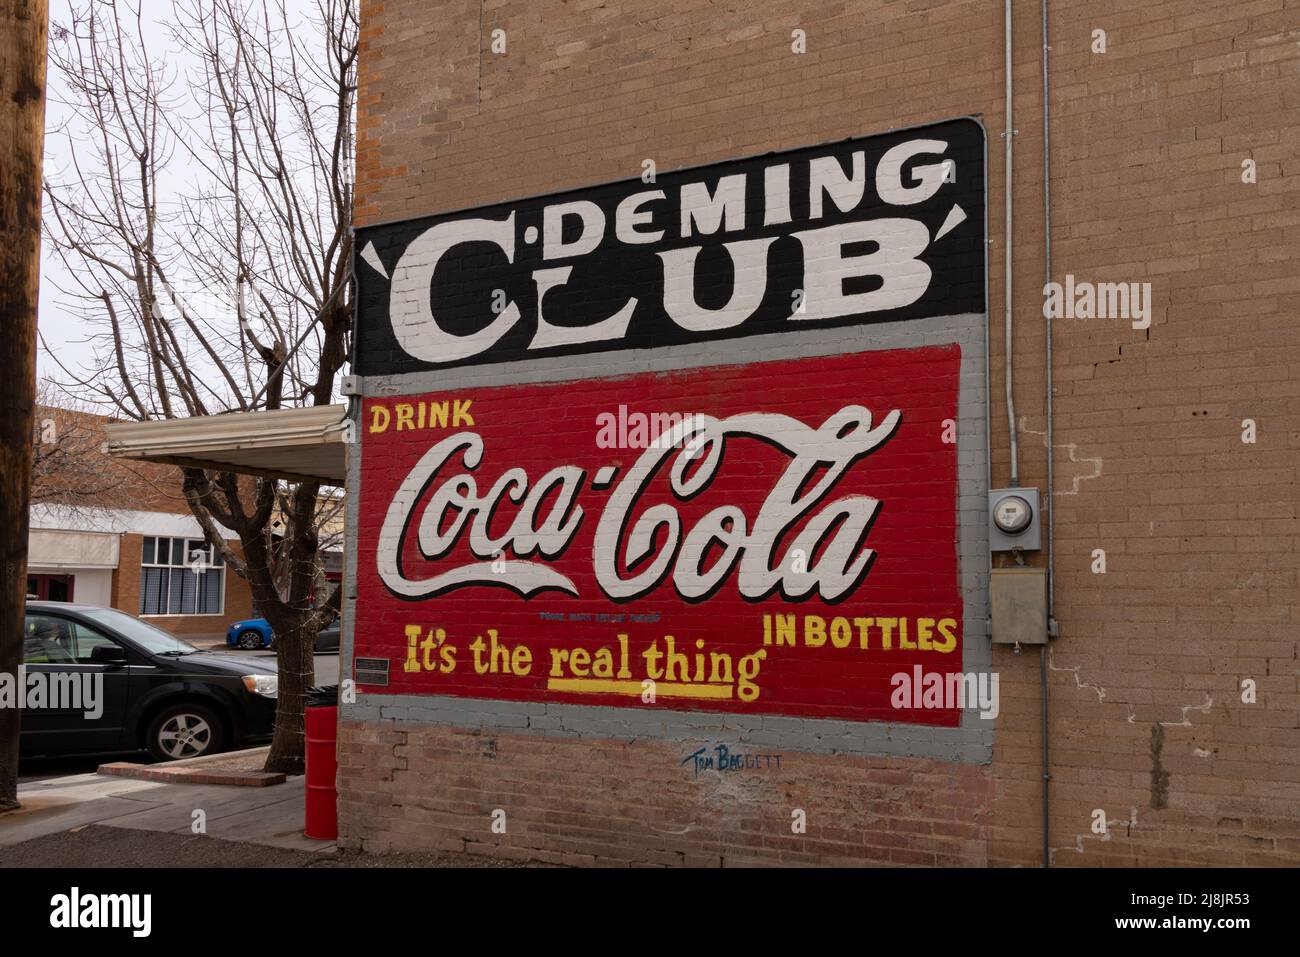 Signs on the side of a building for the Deming Club and Coca Cola that reads Drink Coca Cola in bottles. It's the real thing, Deming, New Mexico. Stock Photo